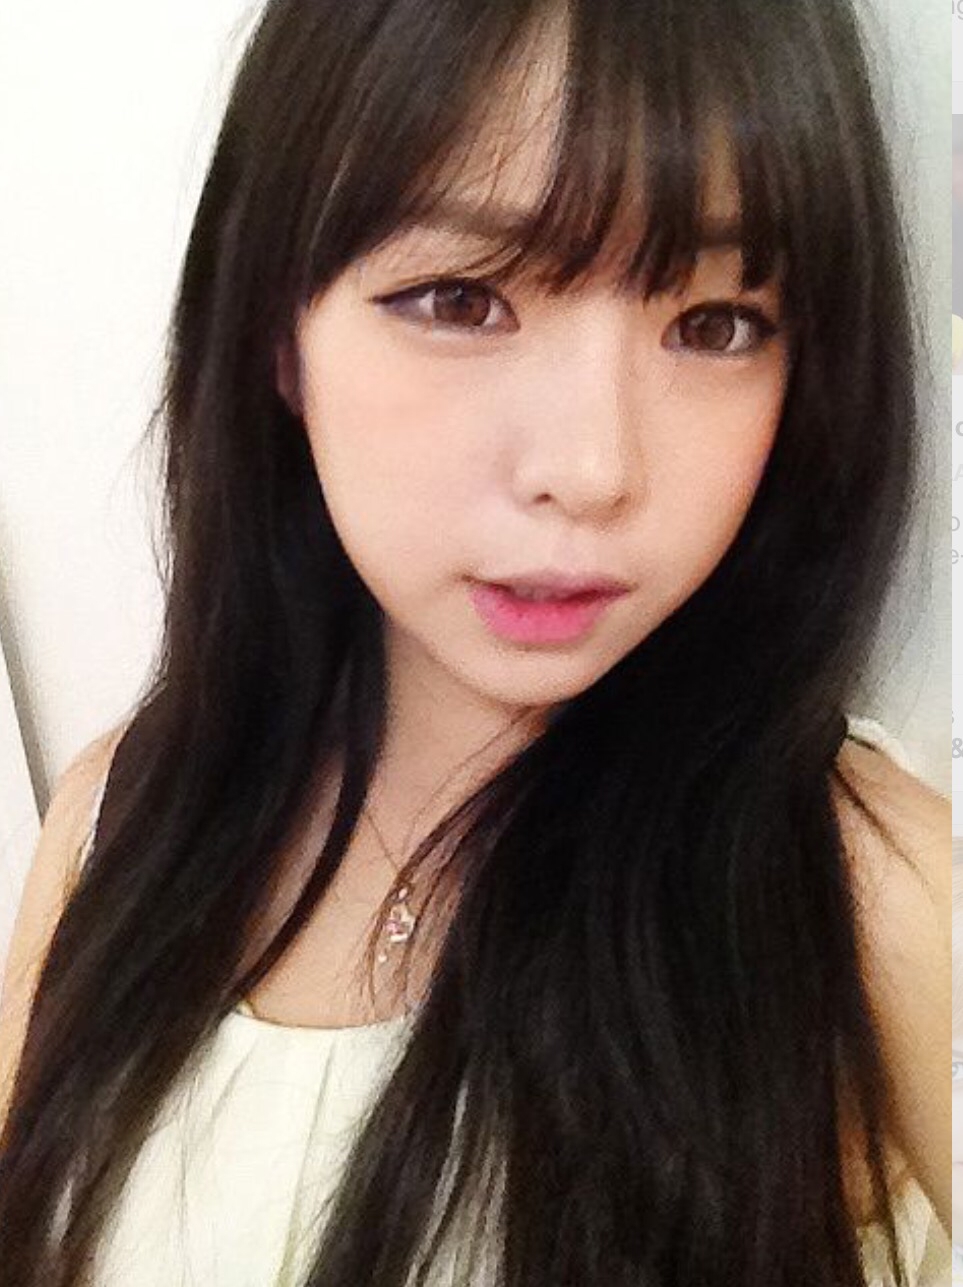 The Hairstyle To Try This Spring: Asian See Through Bangs♡ | Beauty regarding Best Asian Long Hair With Bangs